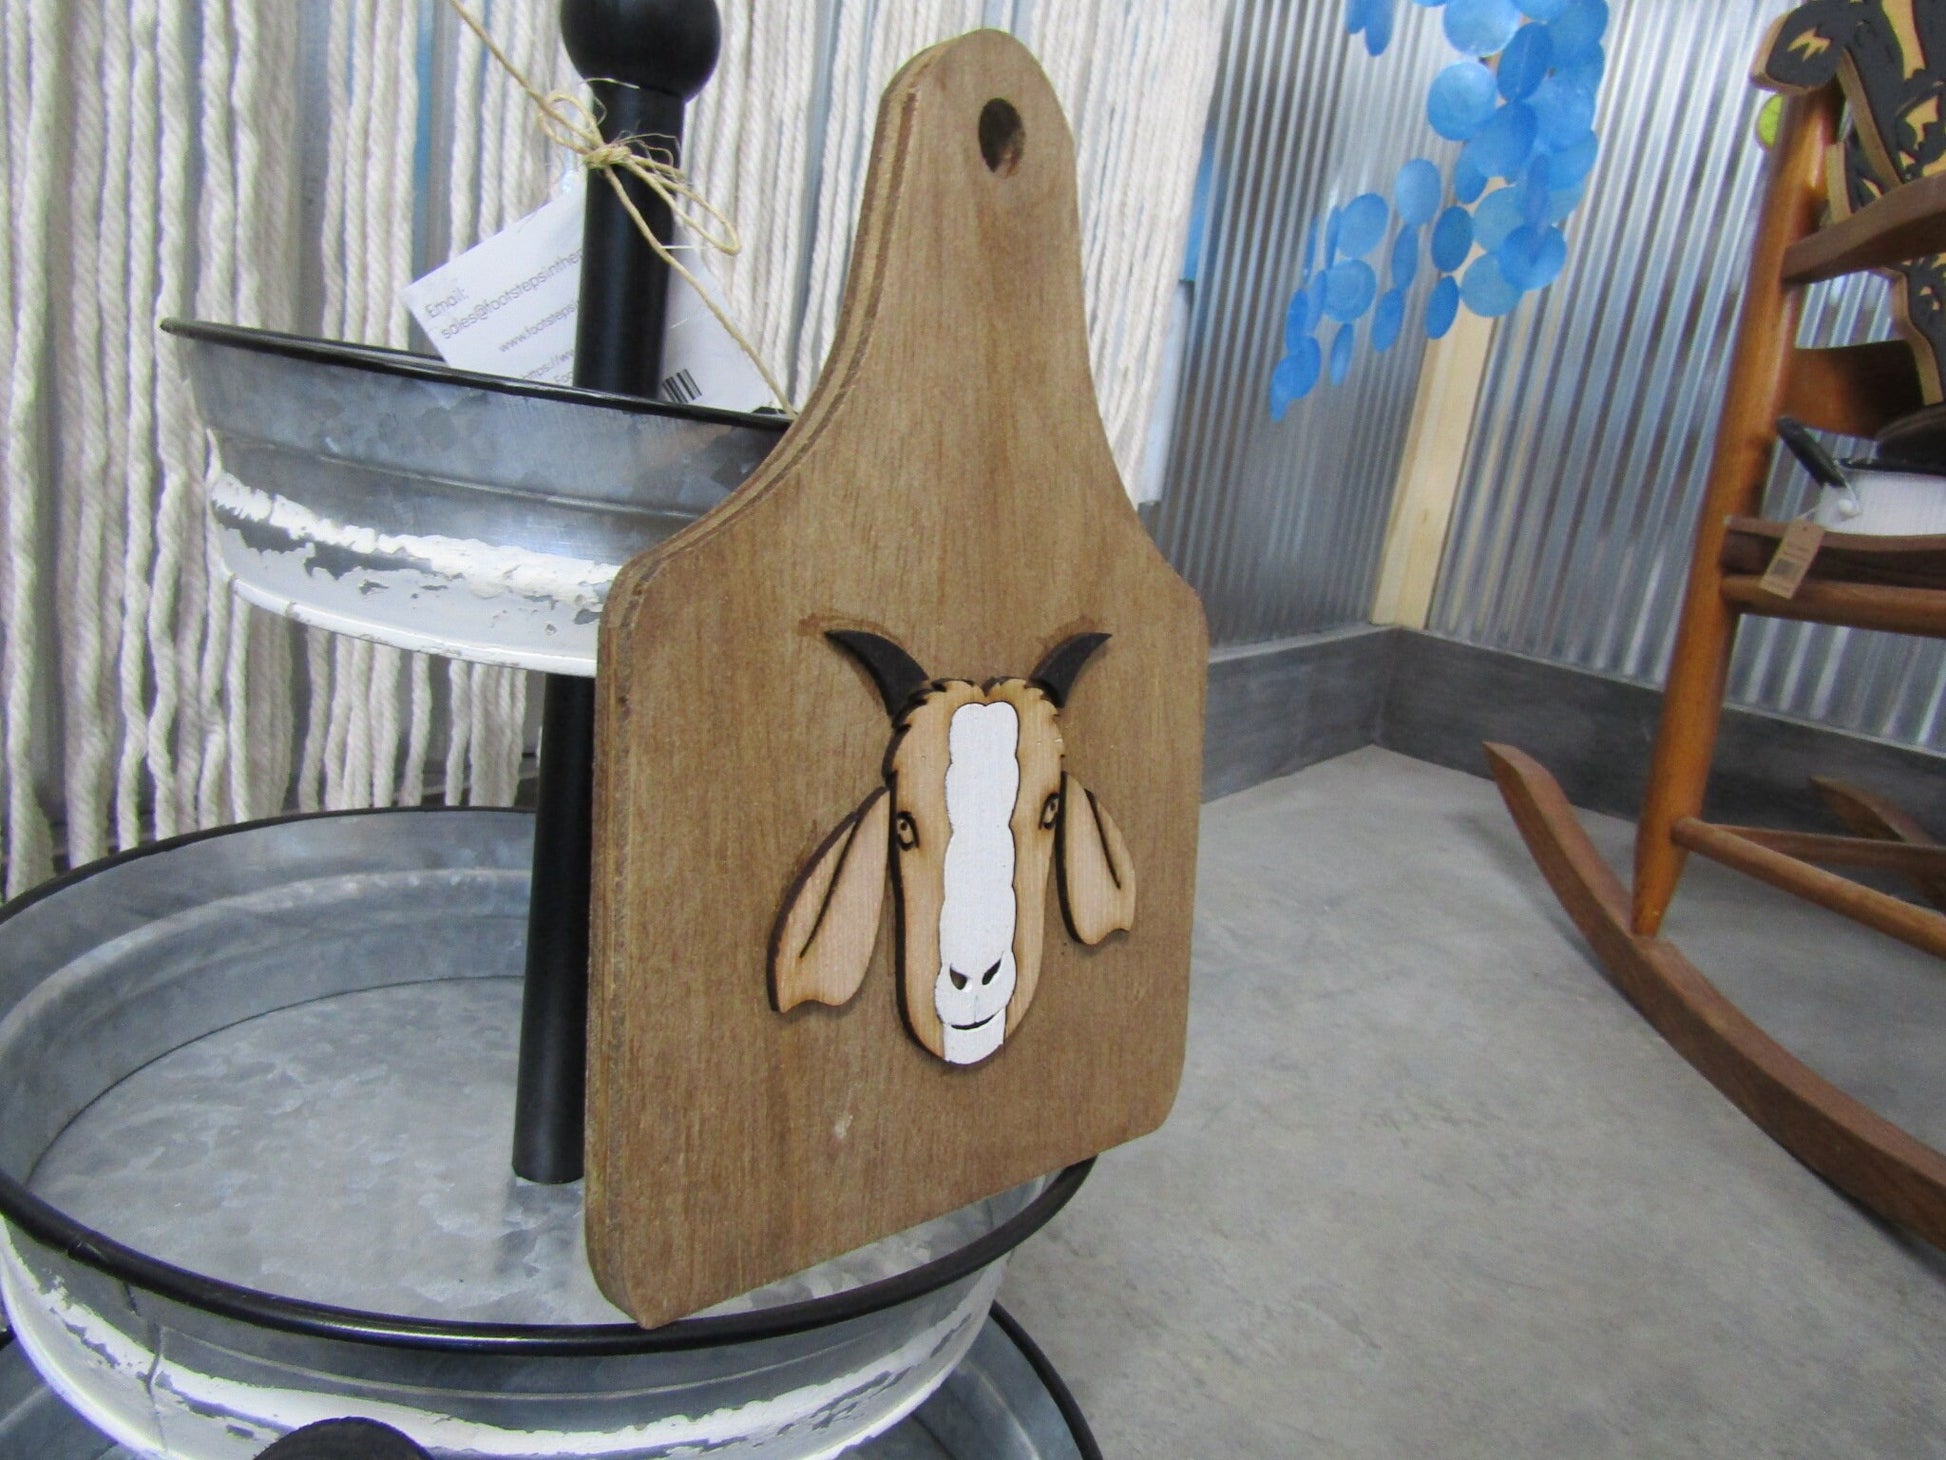 Farm Animal Goat Wooden Ear Tag Teir Tray Decor Farmhouse Decor Blank Natural Wood Small Rustic Country Style Decoration Livestock Kitchen